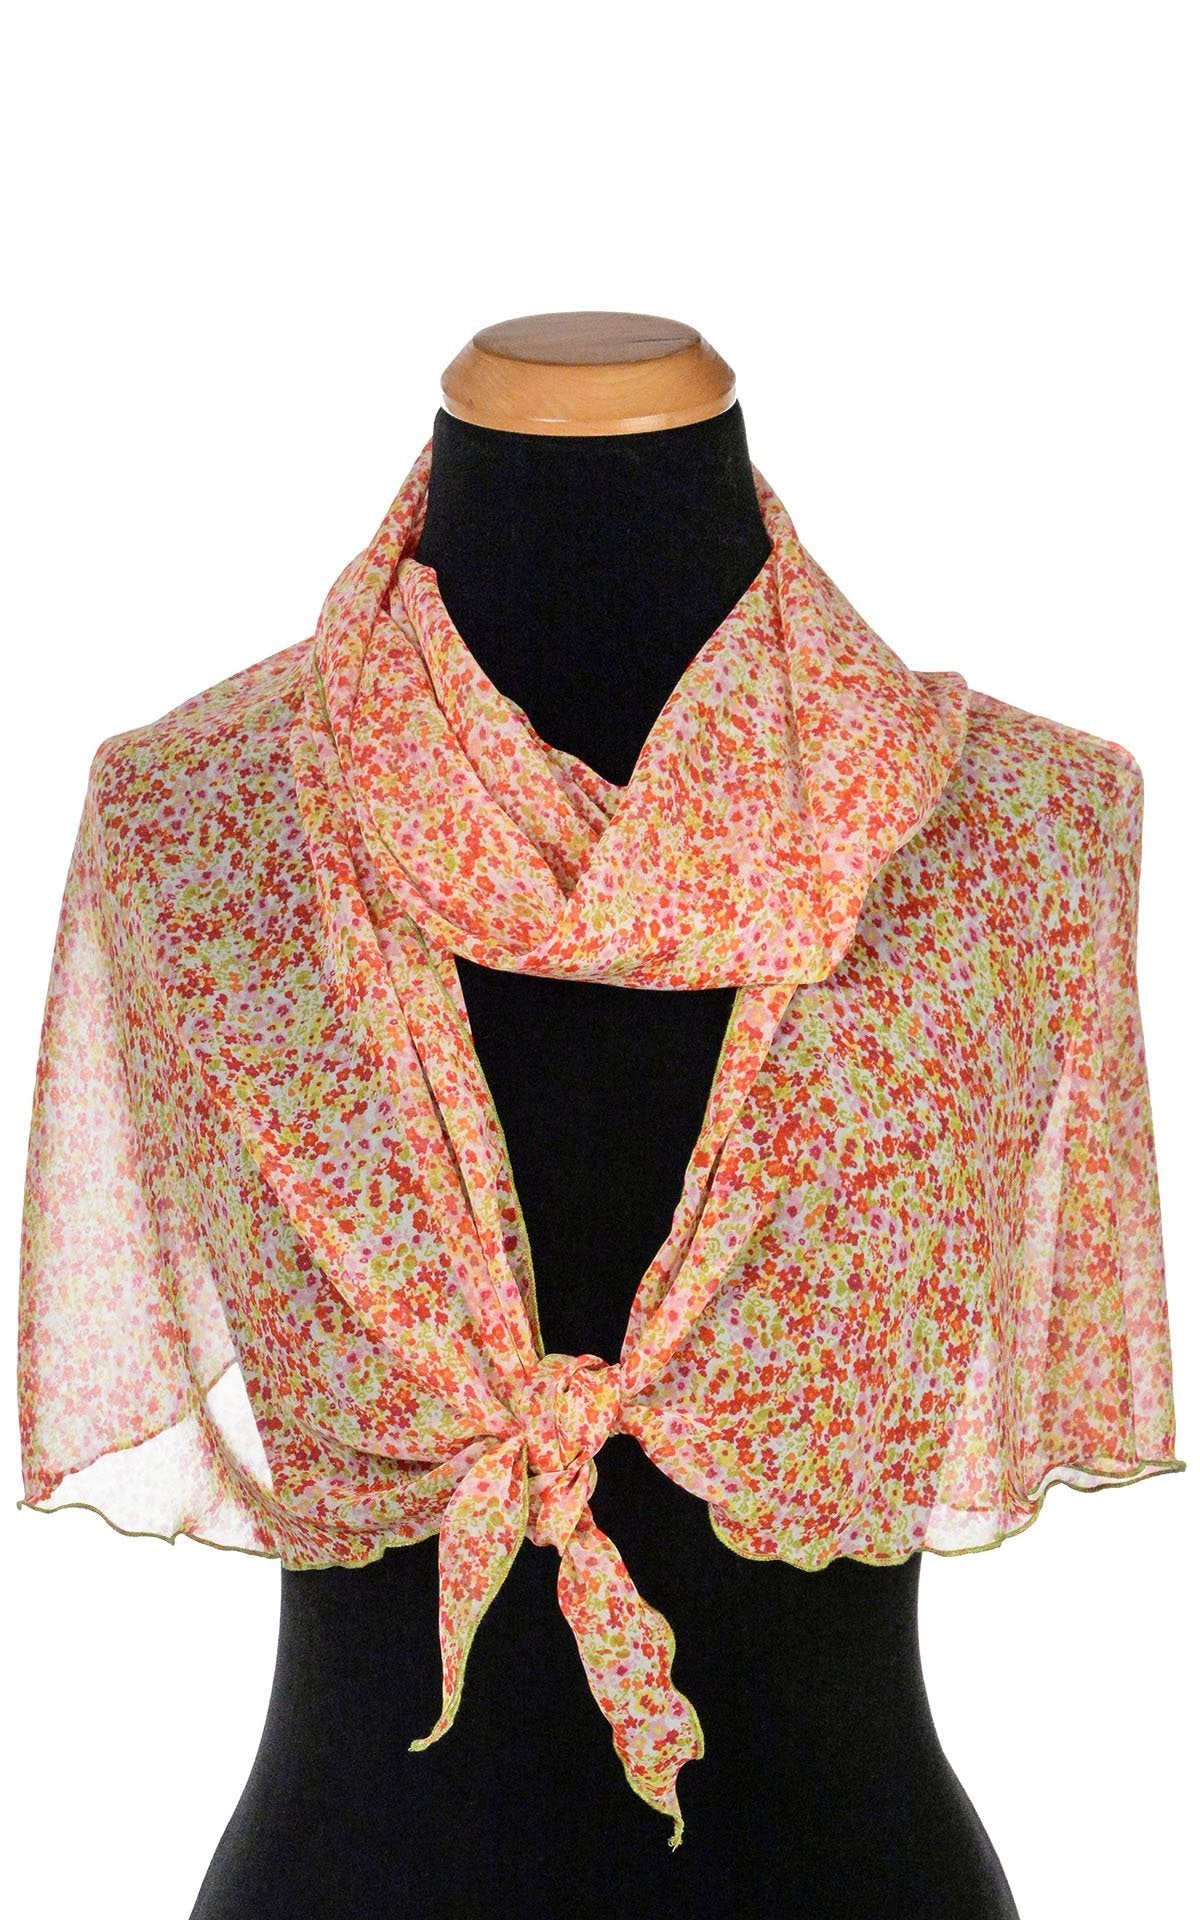 Women’s Large Handkerchief Scarf, Wrap on Mannequin shown wrapped twice | Summer Daze floral Chiffon, lime green, red, yellow, and cream| Handmade in Seattle WA | Pandemonium Millinery